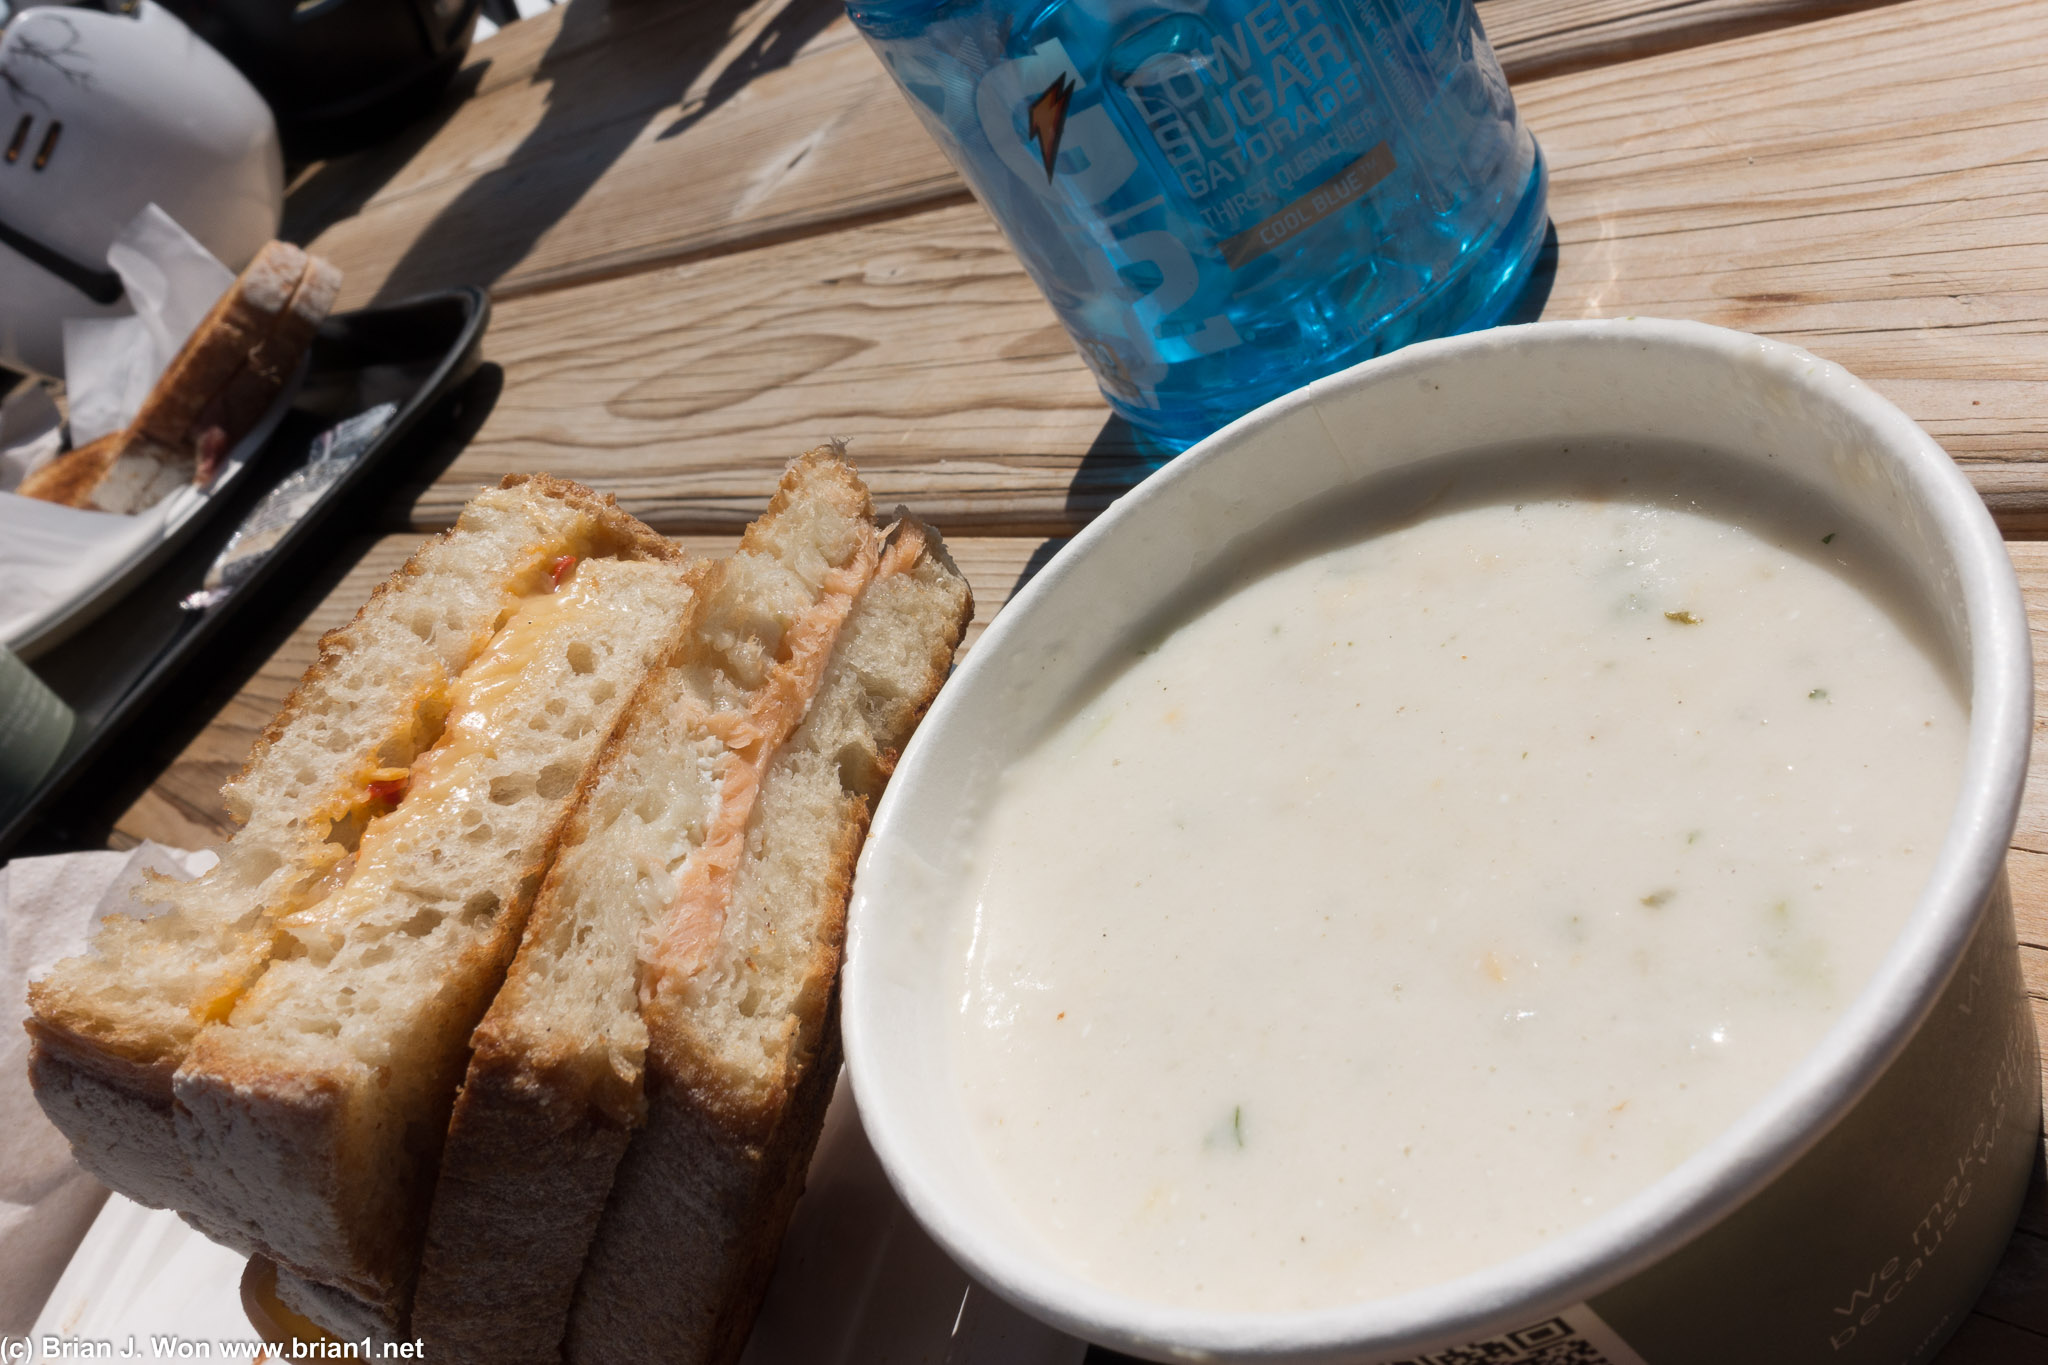 Fancy grilled cheese and an okay clam chowder from Melt House.